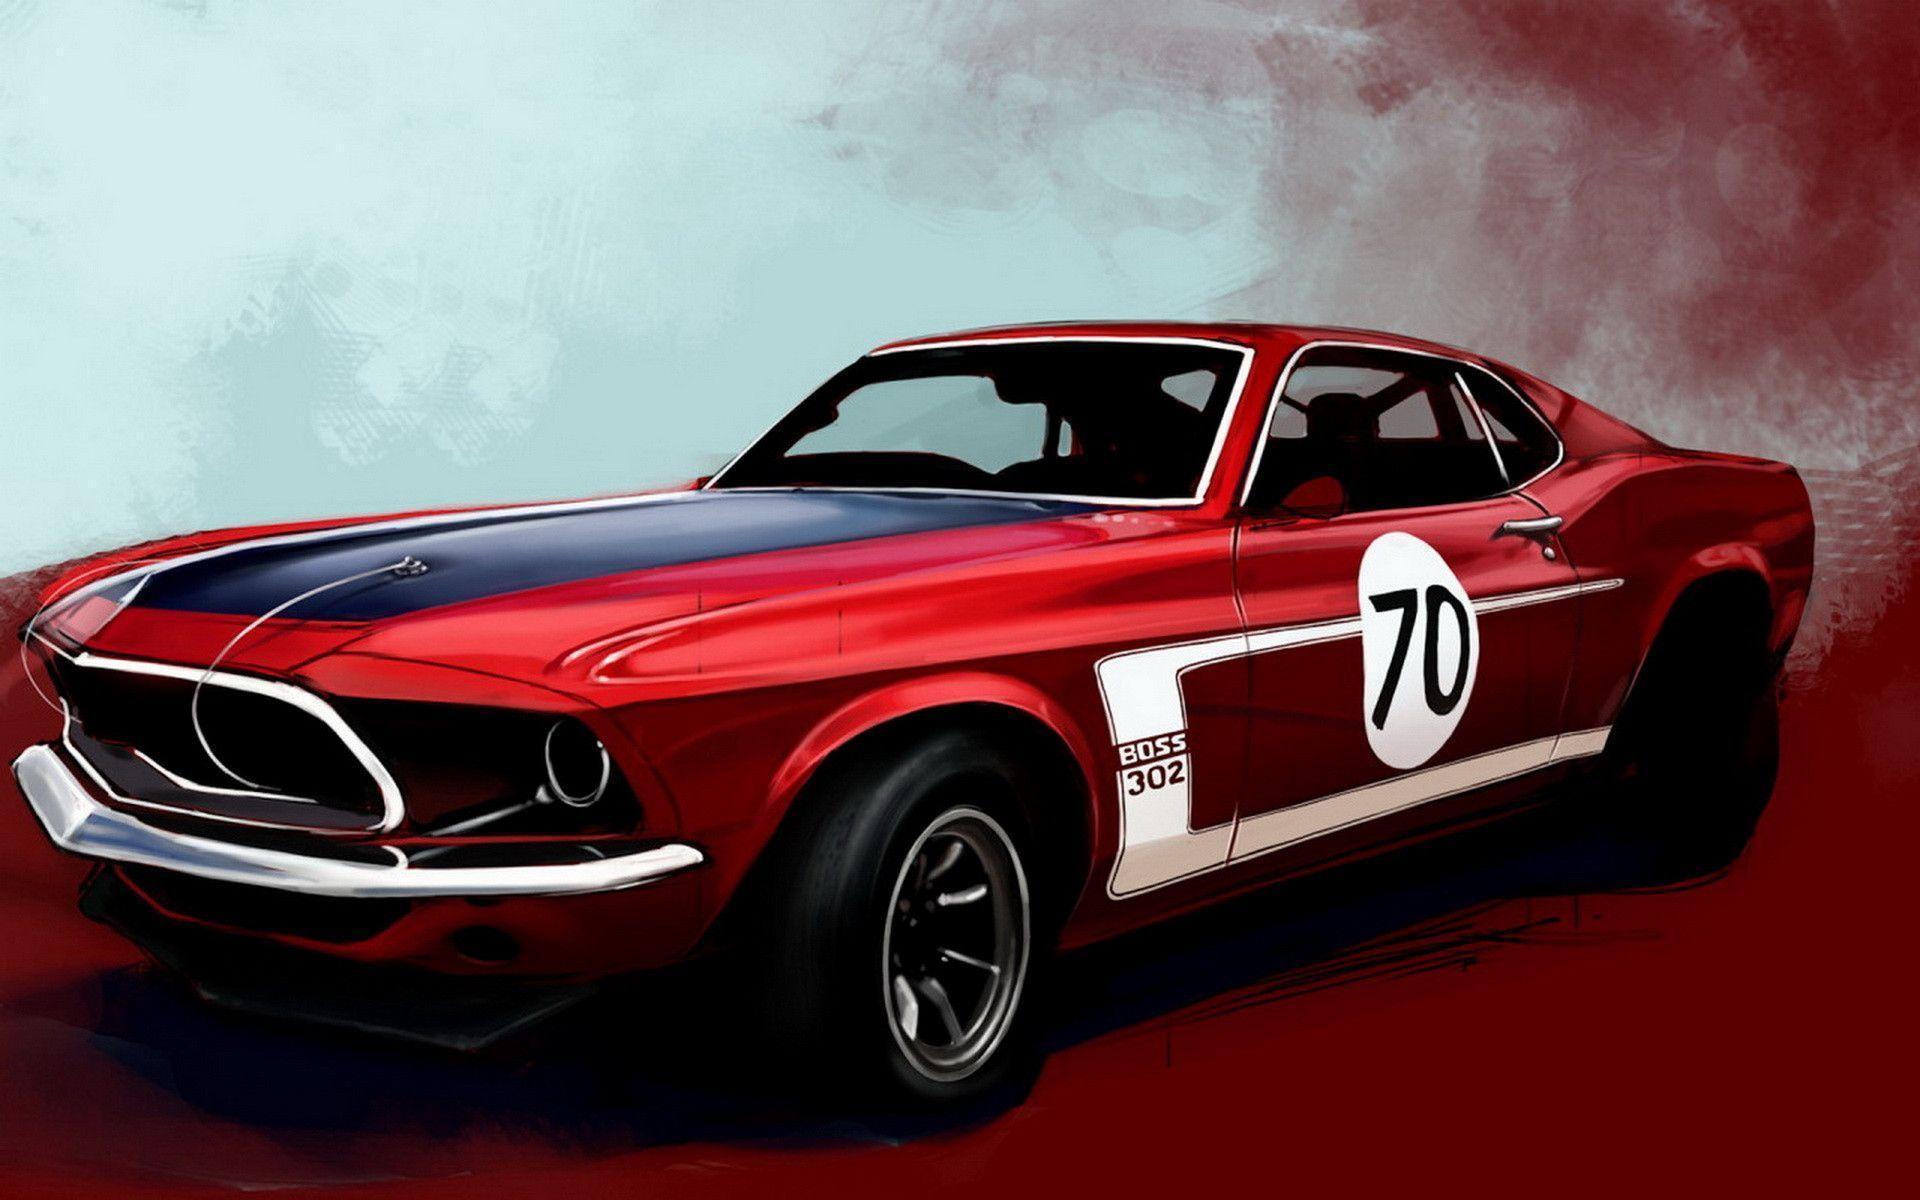 Cool Cars Wallpaper With Background 4753 Full HD Wallpaper Desktop